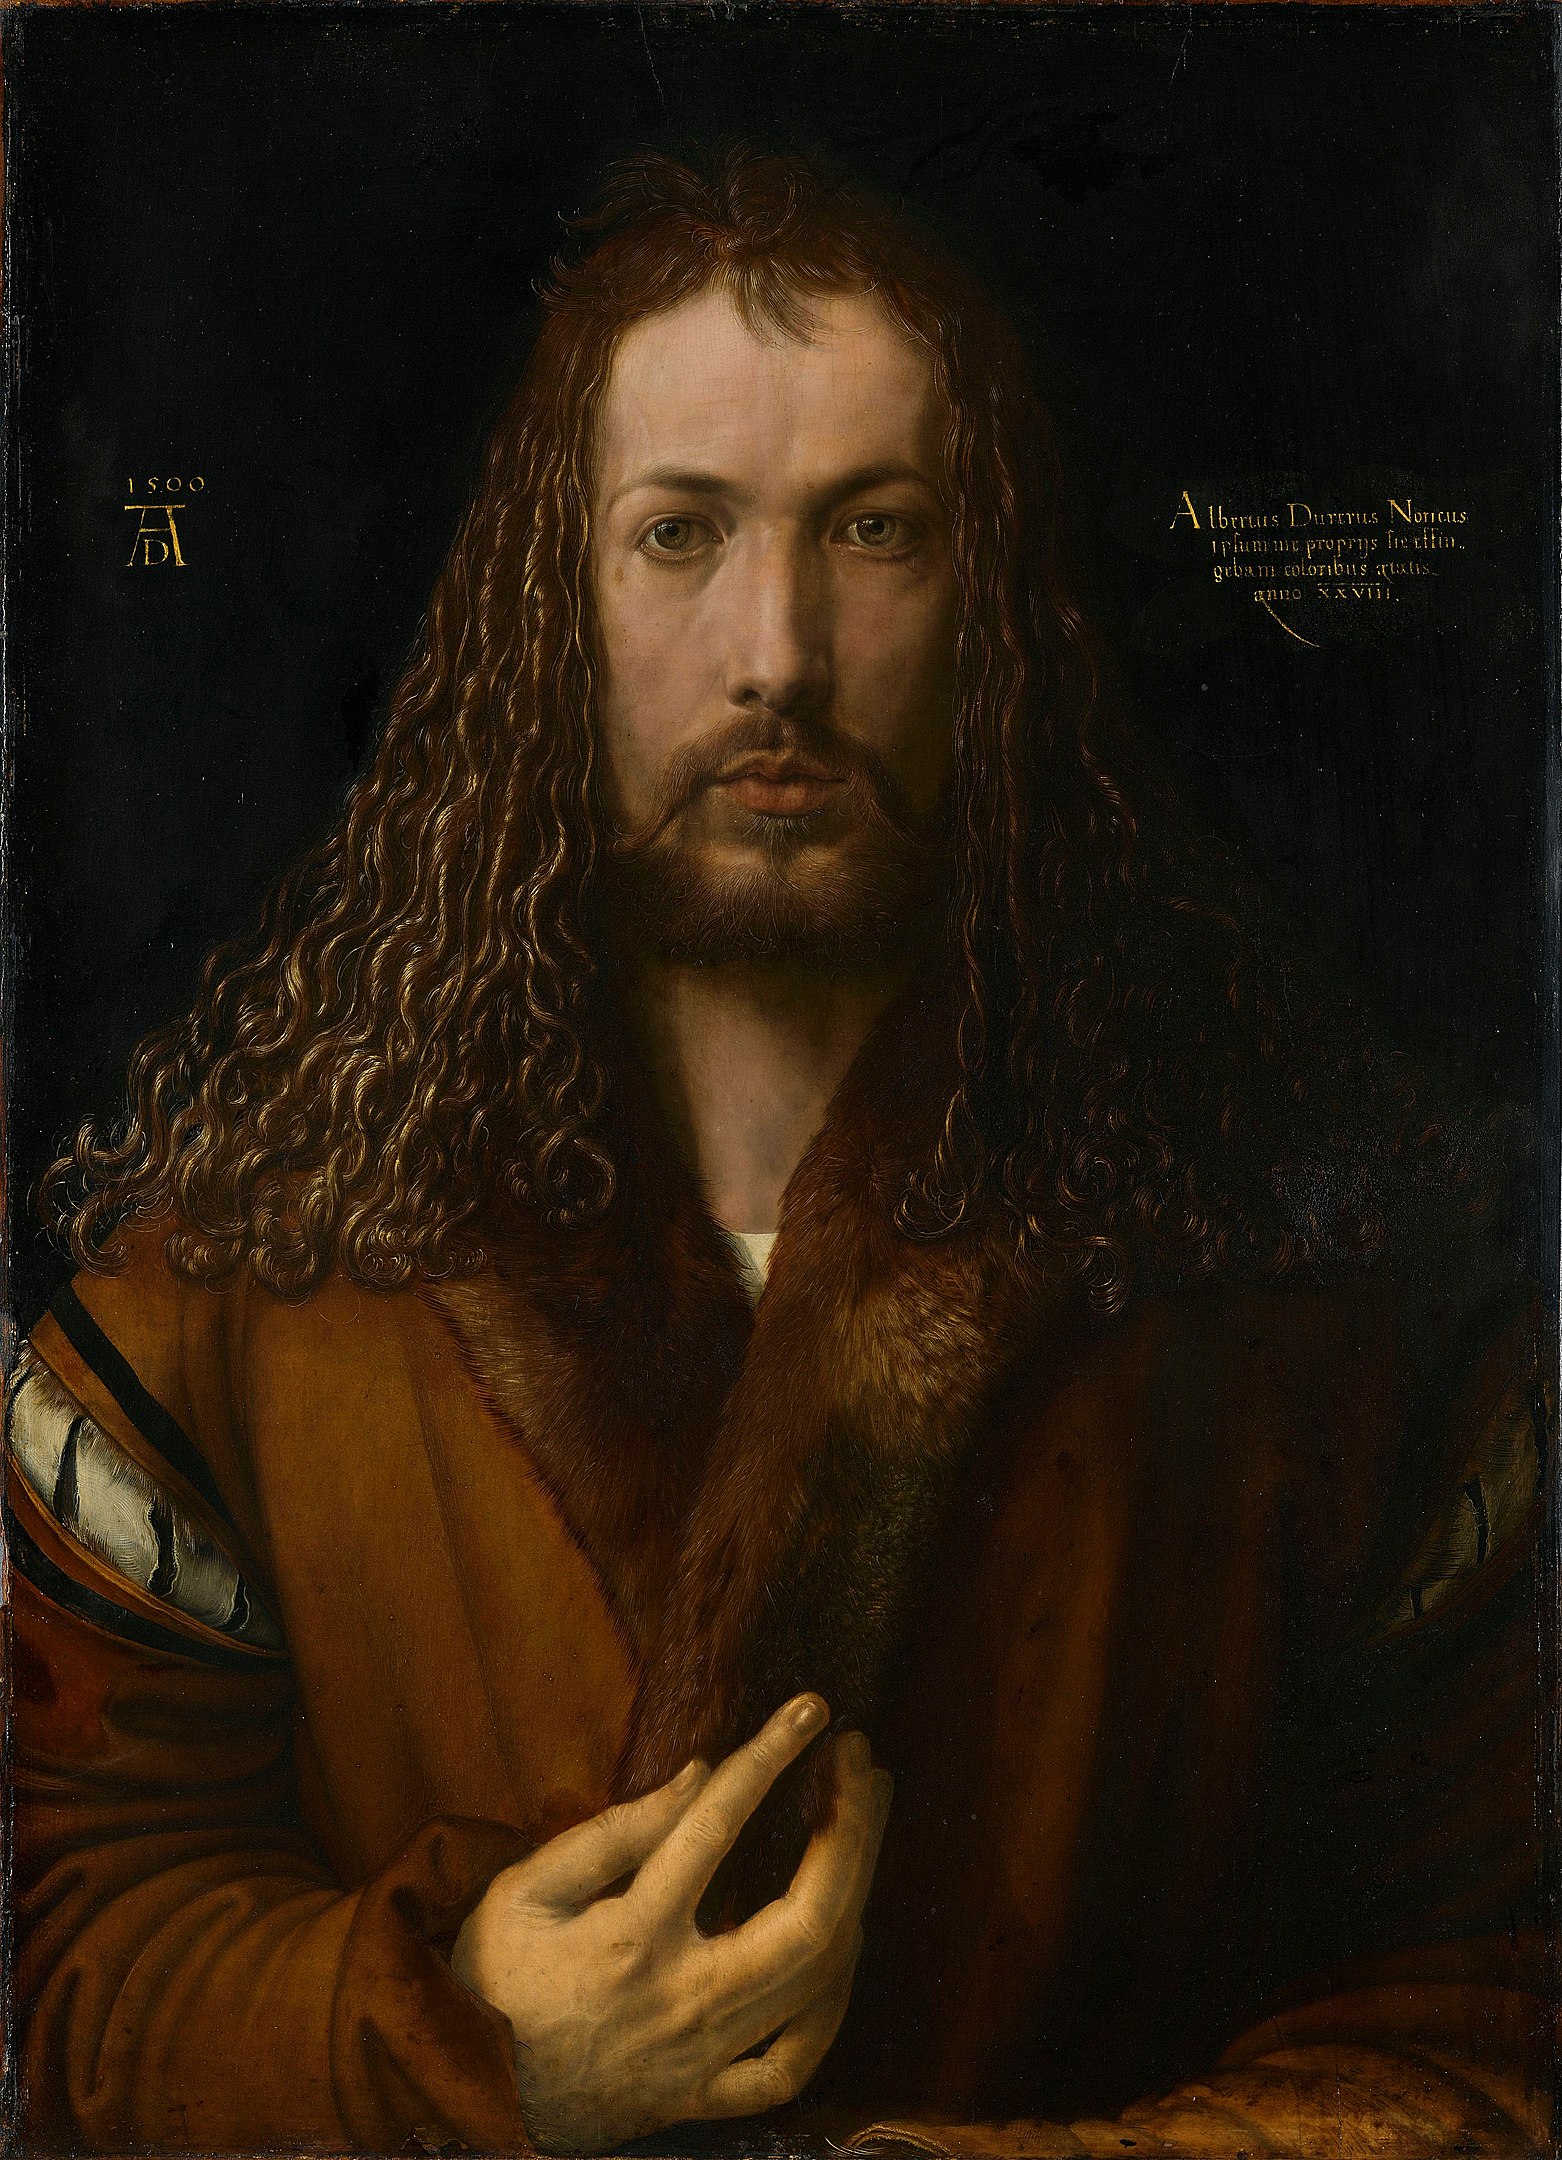 A portrait of a man with his fingers brushing lightly over his fur jacket